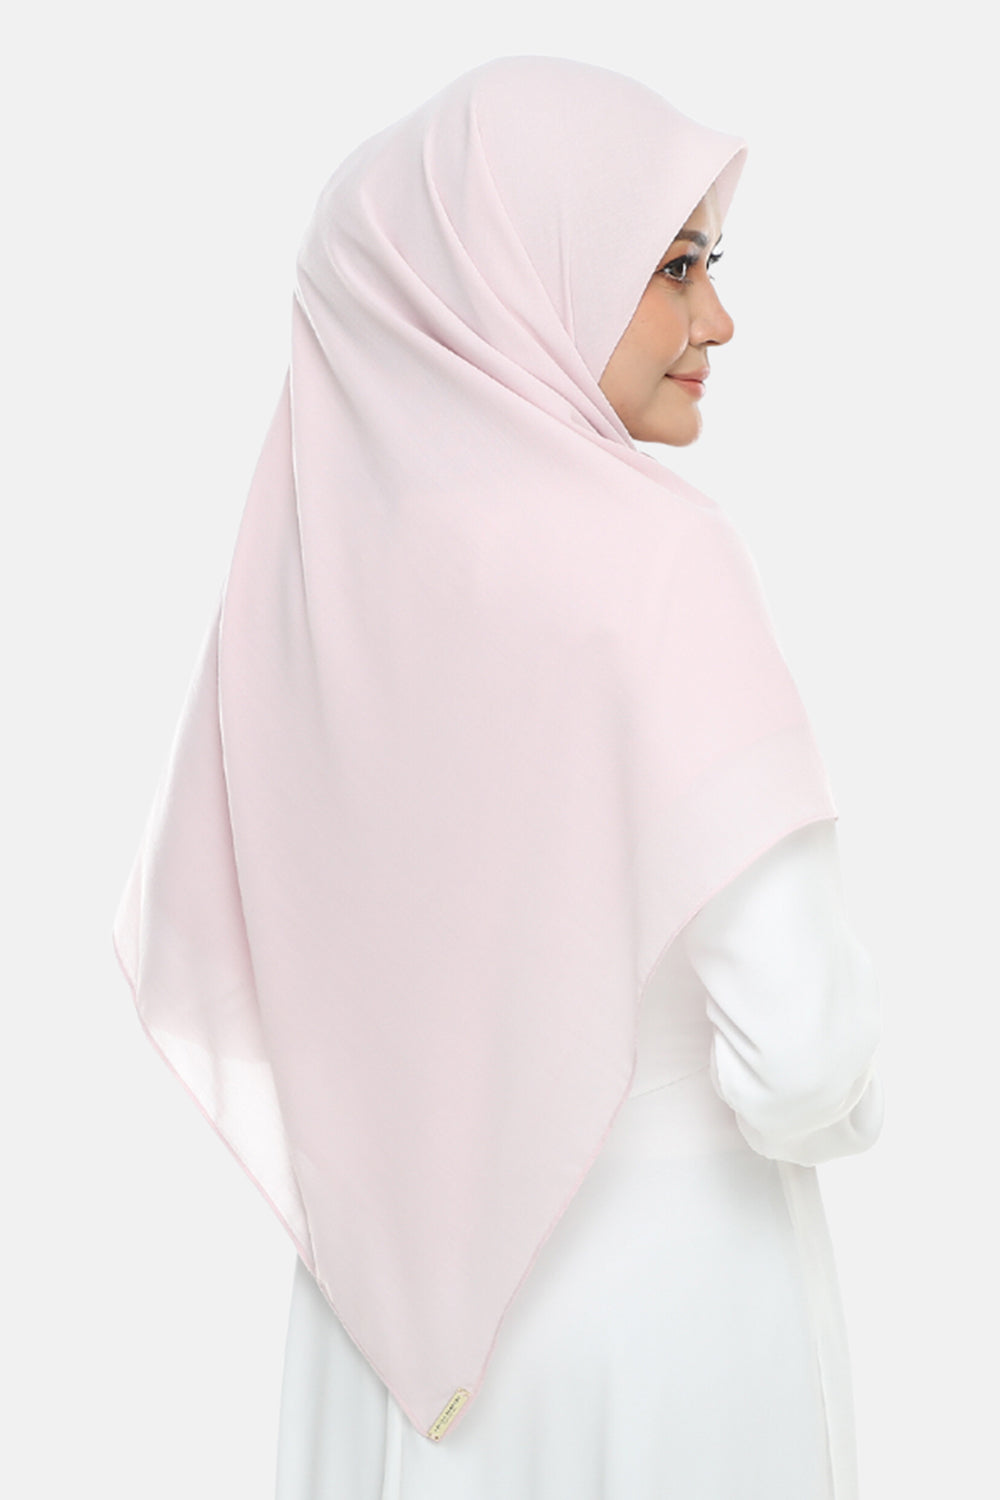 Classic Bawal Cherry Pink